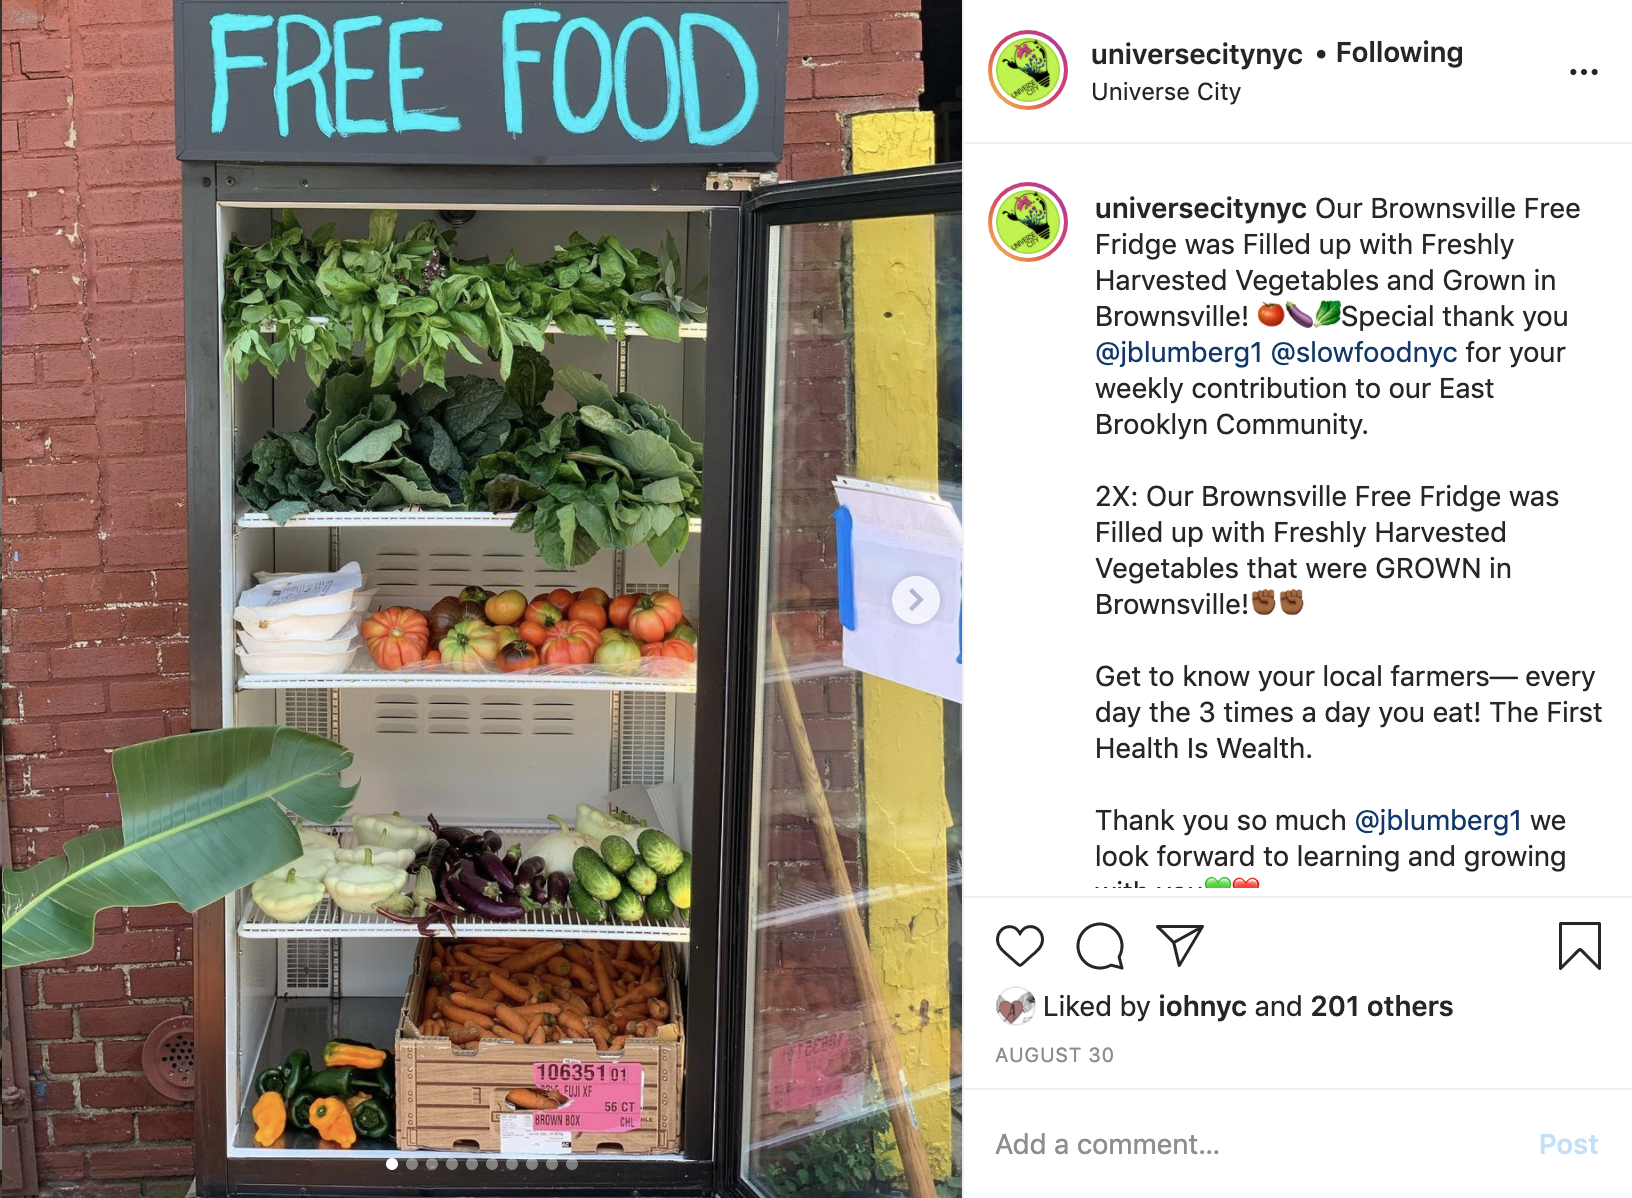 Instagram post of Brownsville Free Fridge full of vegetables with words 'FREE FOOD' painted at the top